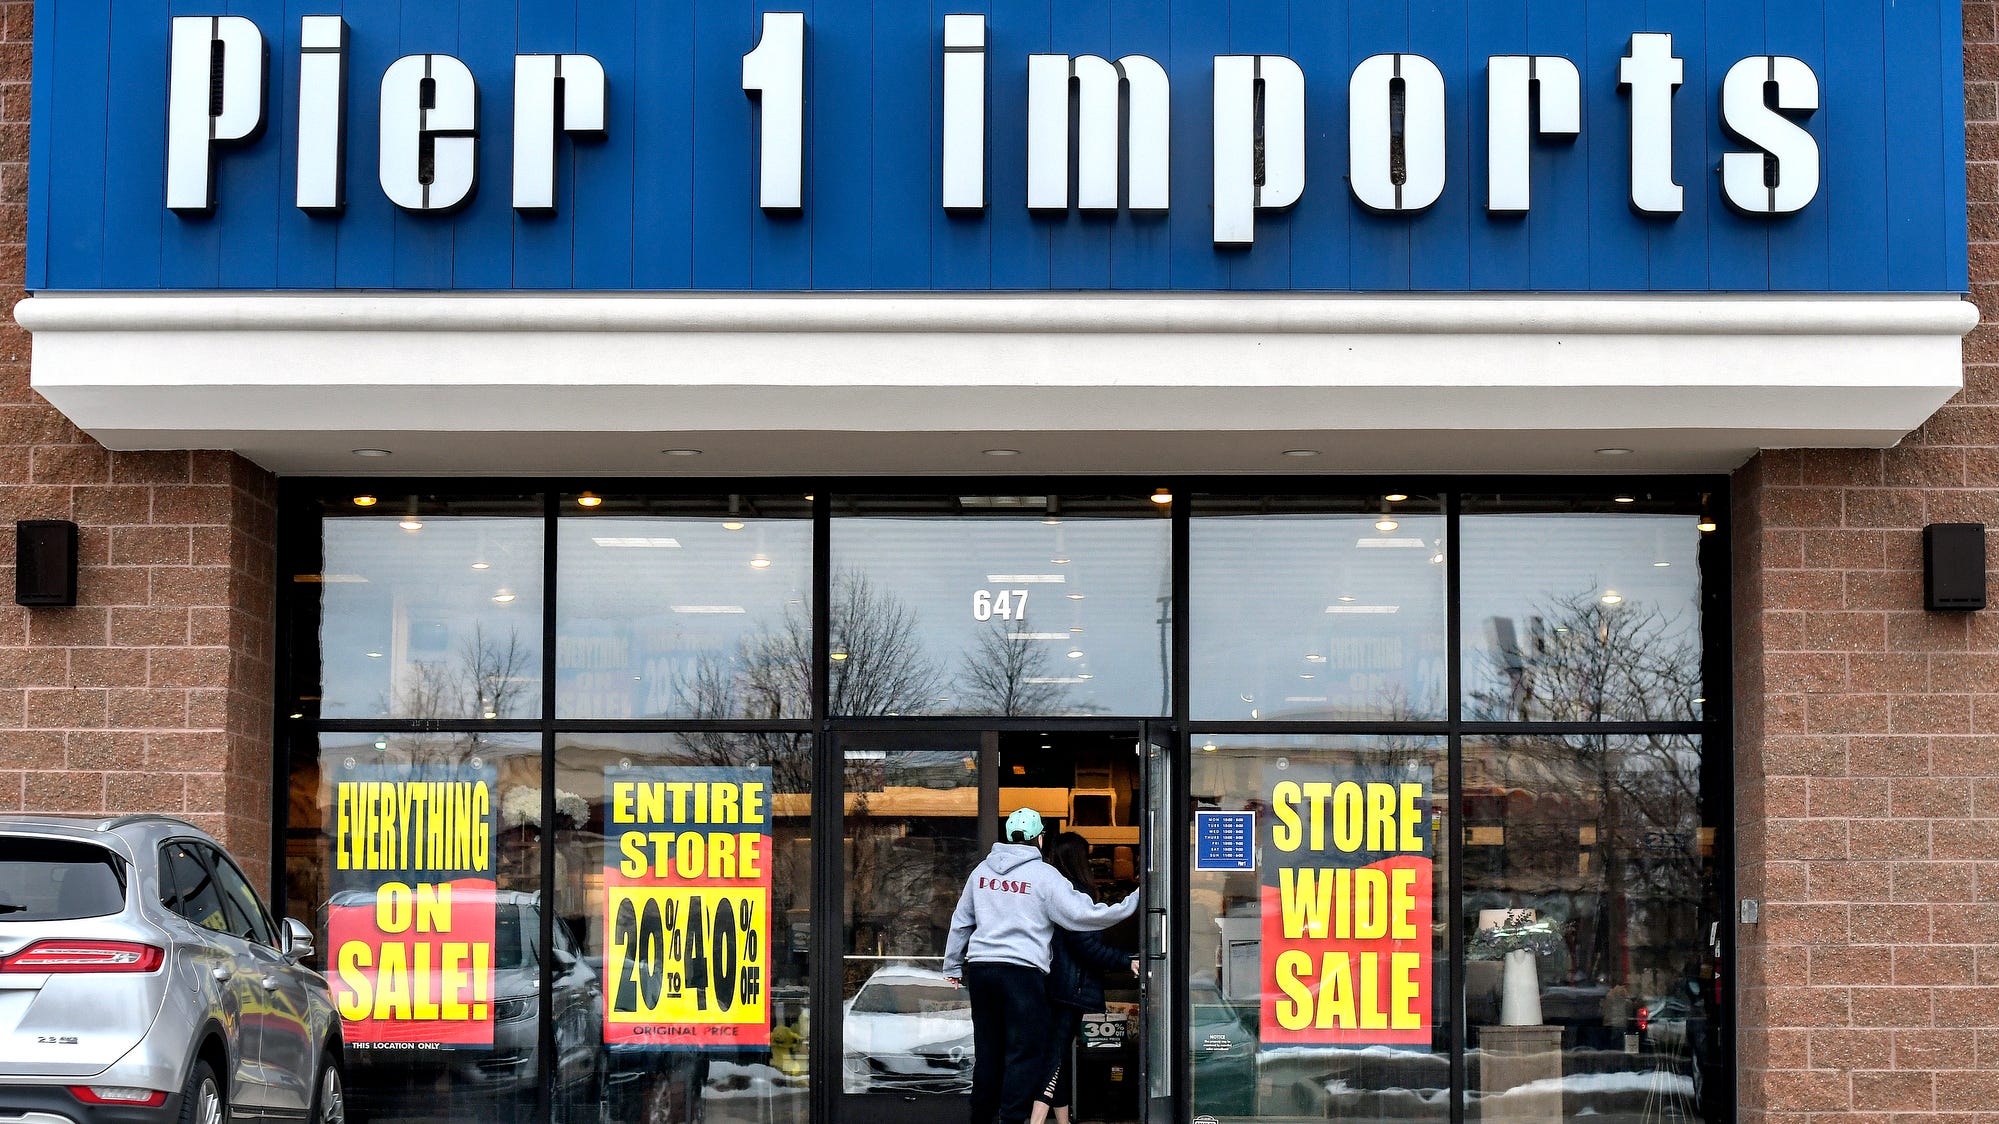 Pier 1 Stores Closing In Indiana